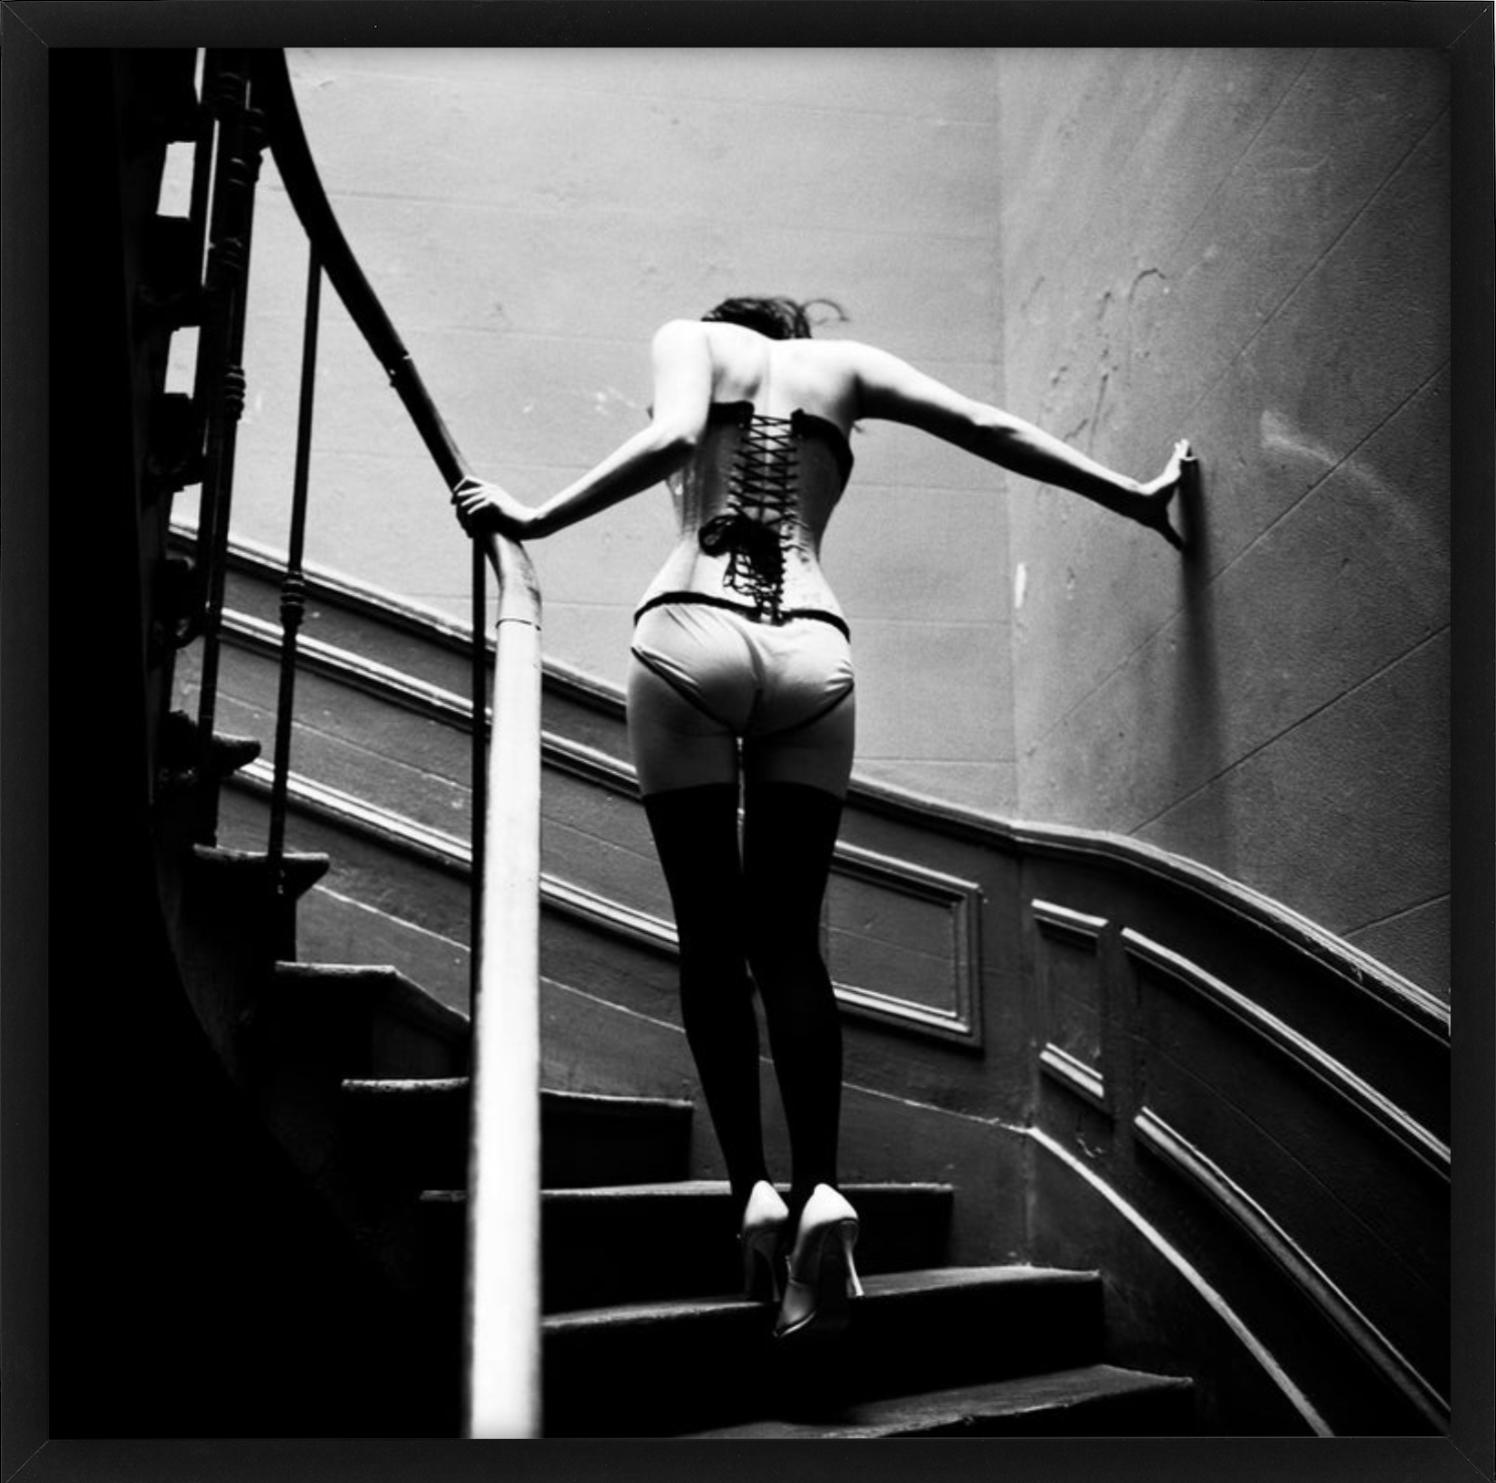 Upstairs, Paris - Model in Lingerie walking up Stairs, fine art photography 1996 - Black Black and White Photograph by Ellen von Unwerth